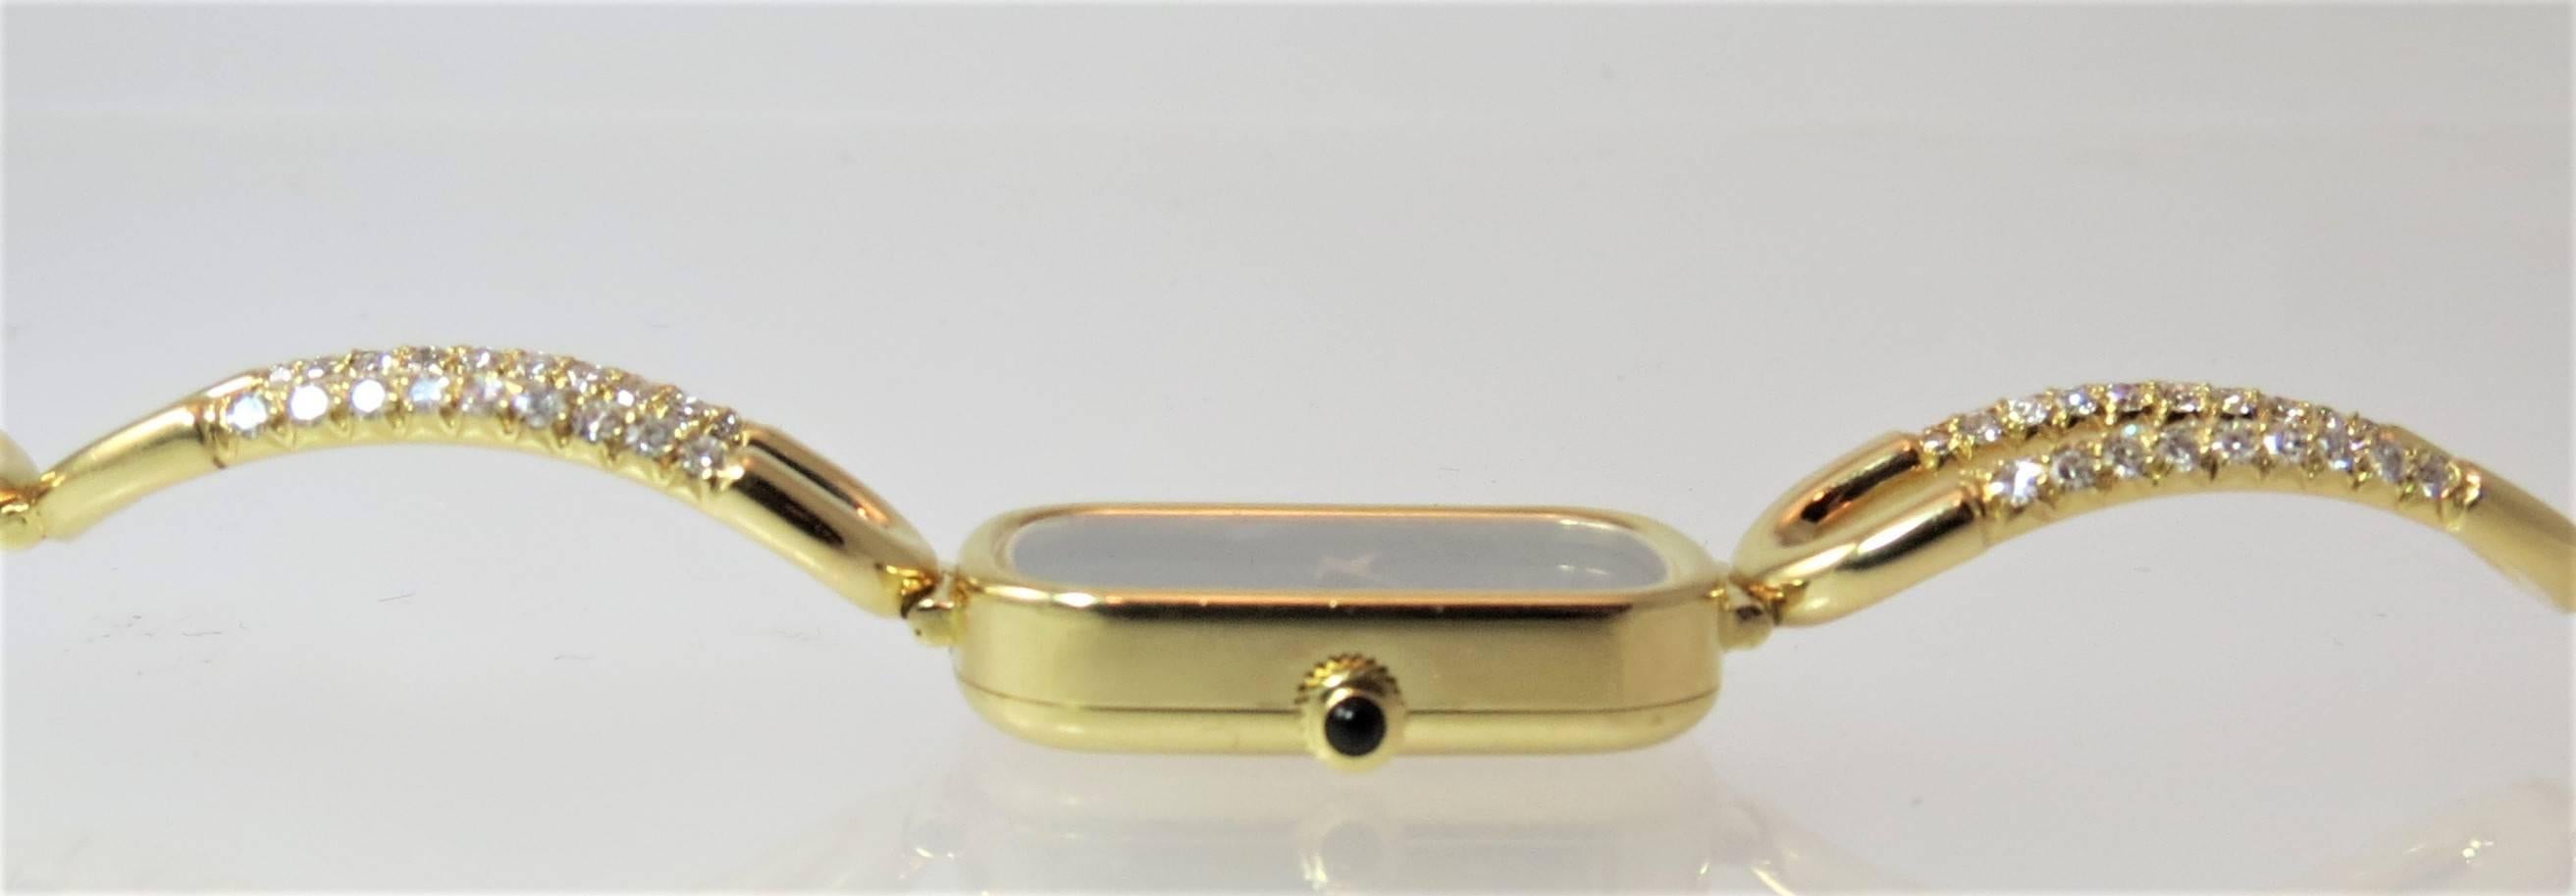 Chopard Yellow Gold Diamond Bracelet manual Wristwatchi In Excellent Condition For Sale In Chicago, IL